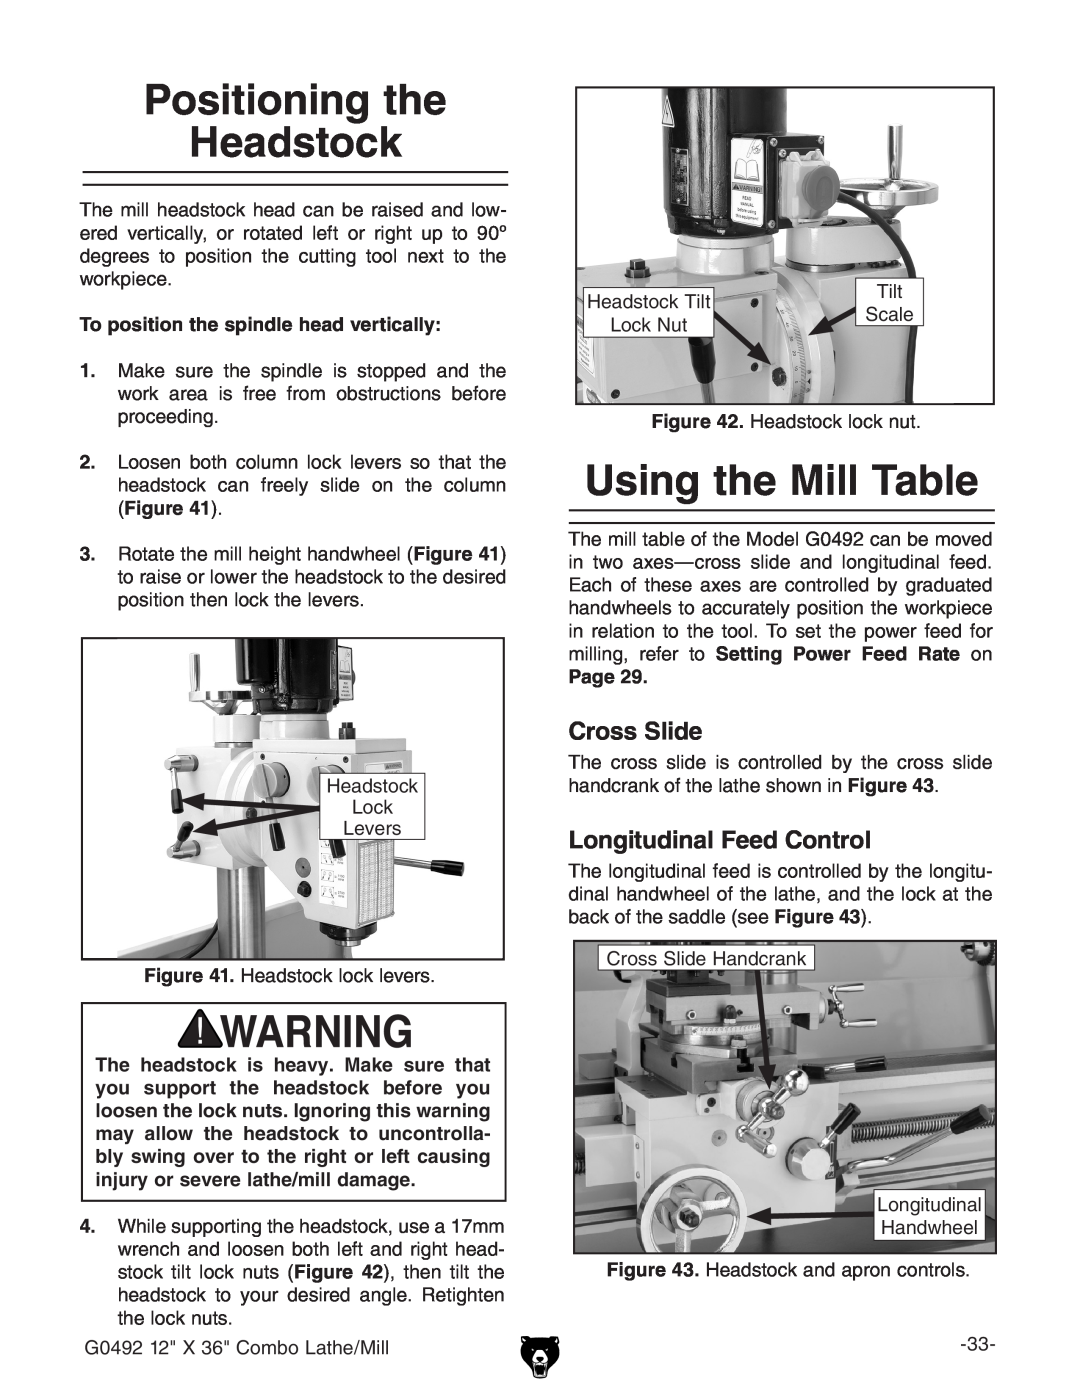 Grizzly G0492 owner manual Positioning the Headstock, Using the Mill Table, Cross Slide, Longitudinal Feed Control, Page 